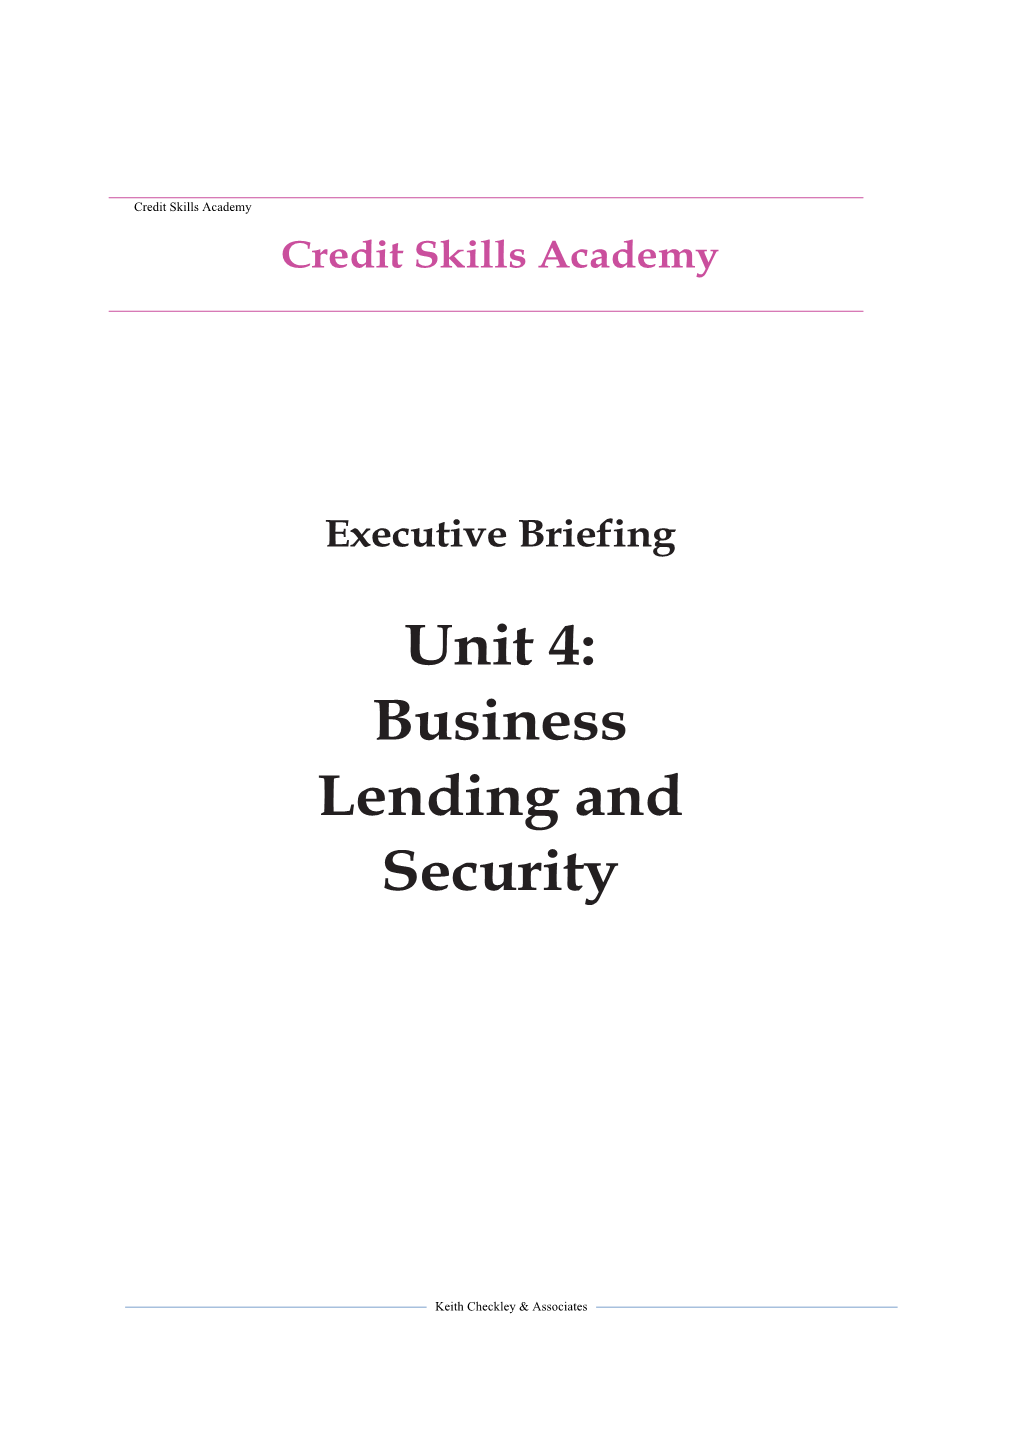 Unit 4: Business Lending and Security